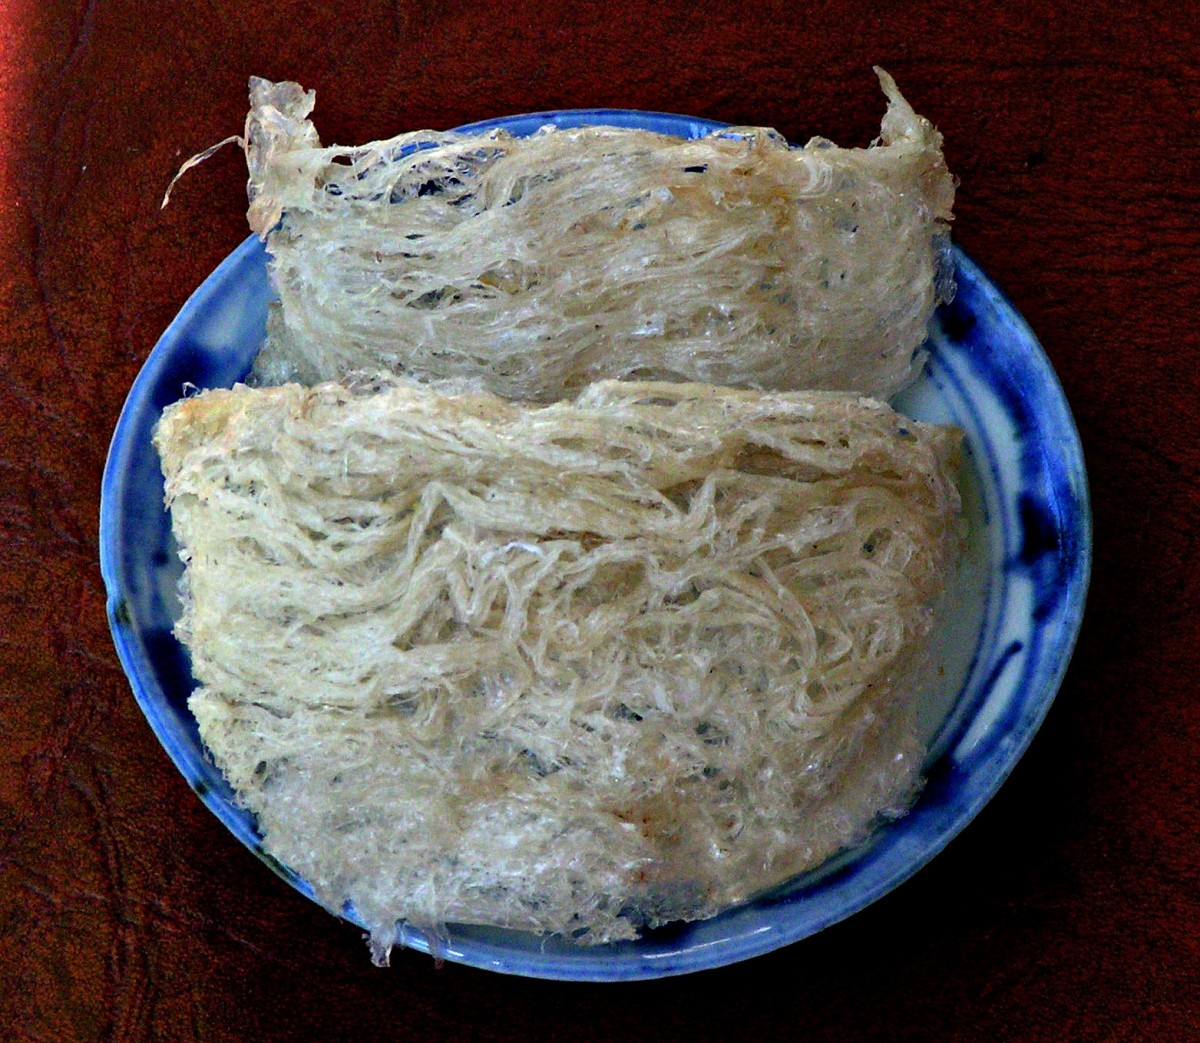 birds-nest-soup-an-expensive-and-exquisite-delicacy